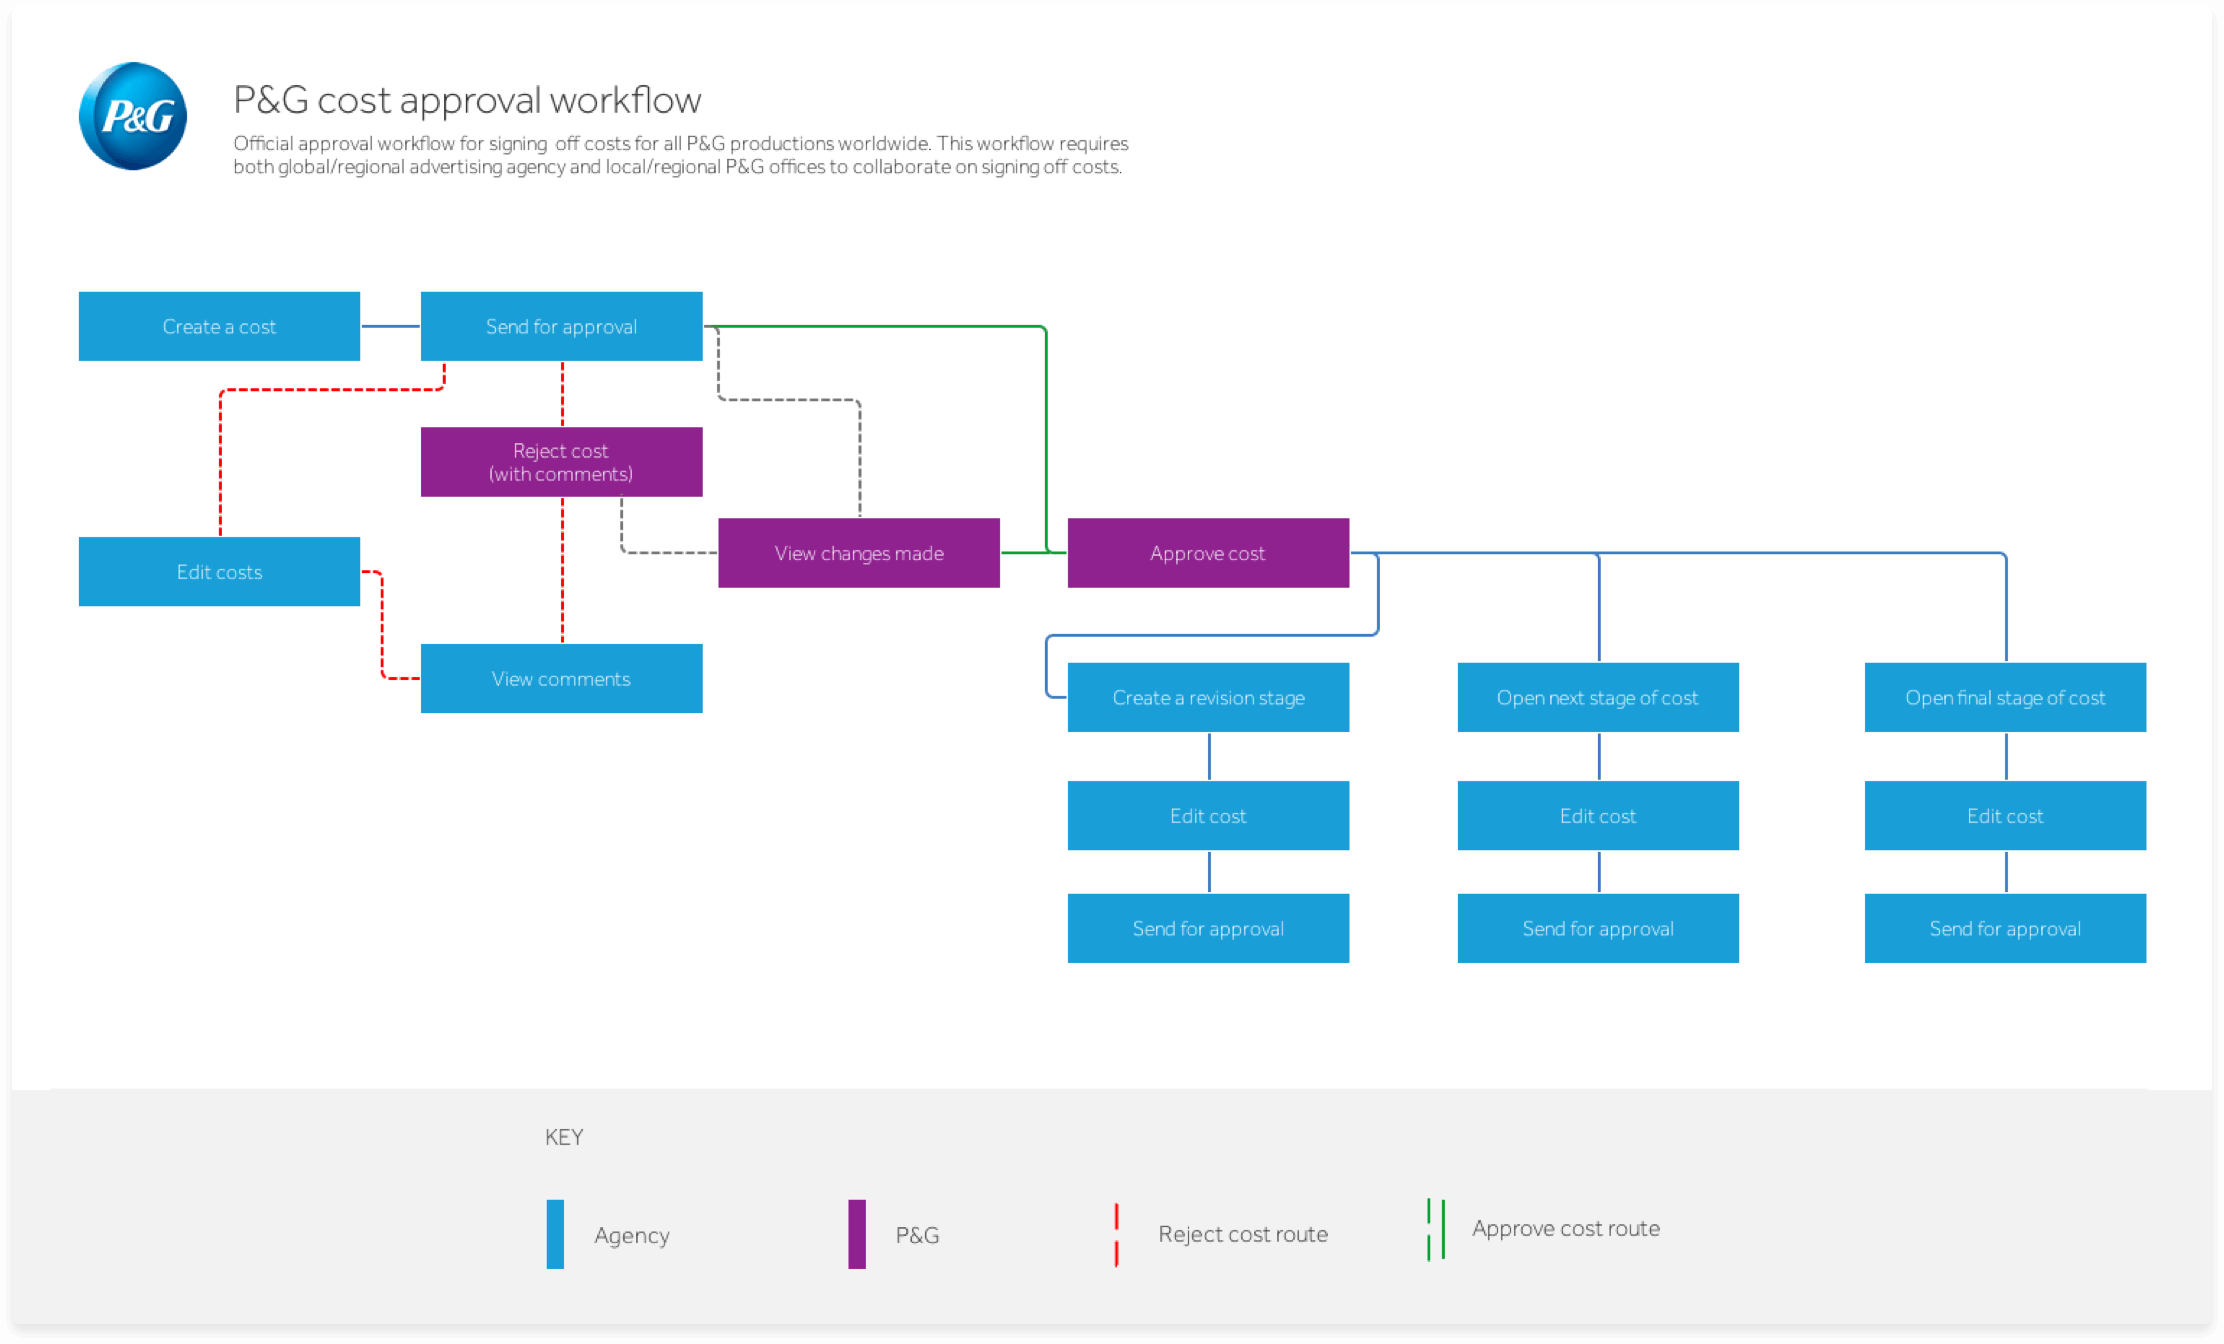 Approval Workflow Map